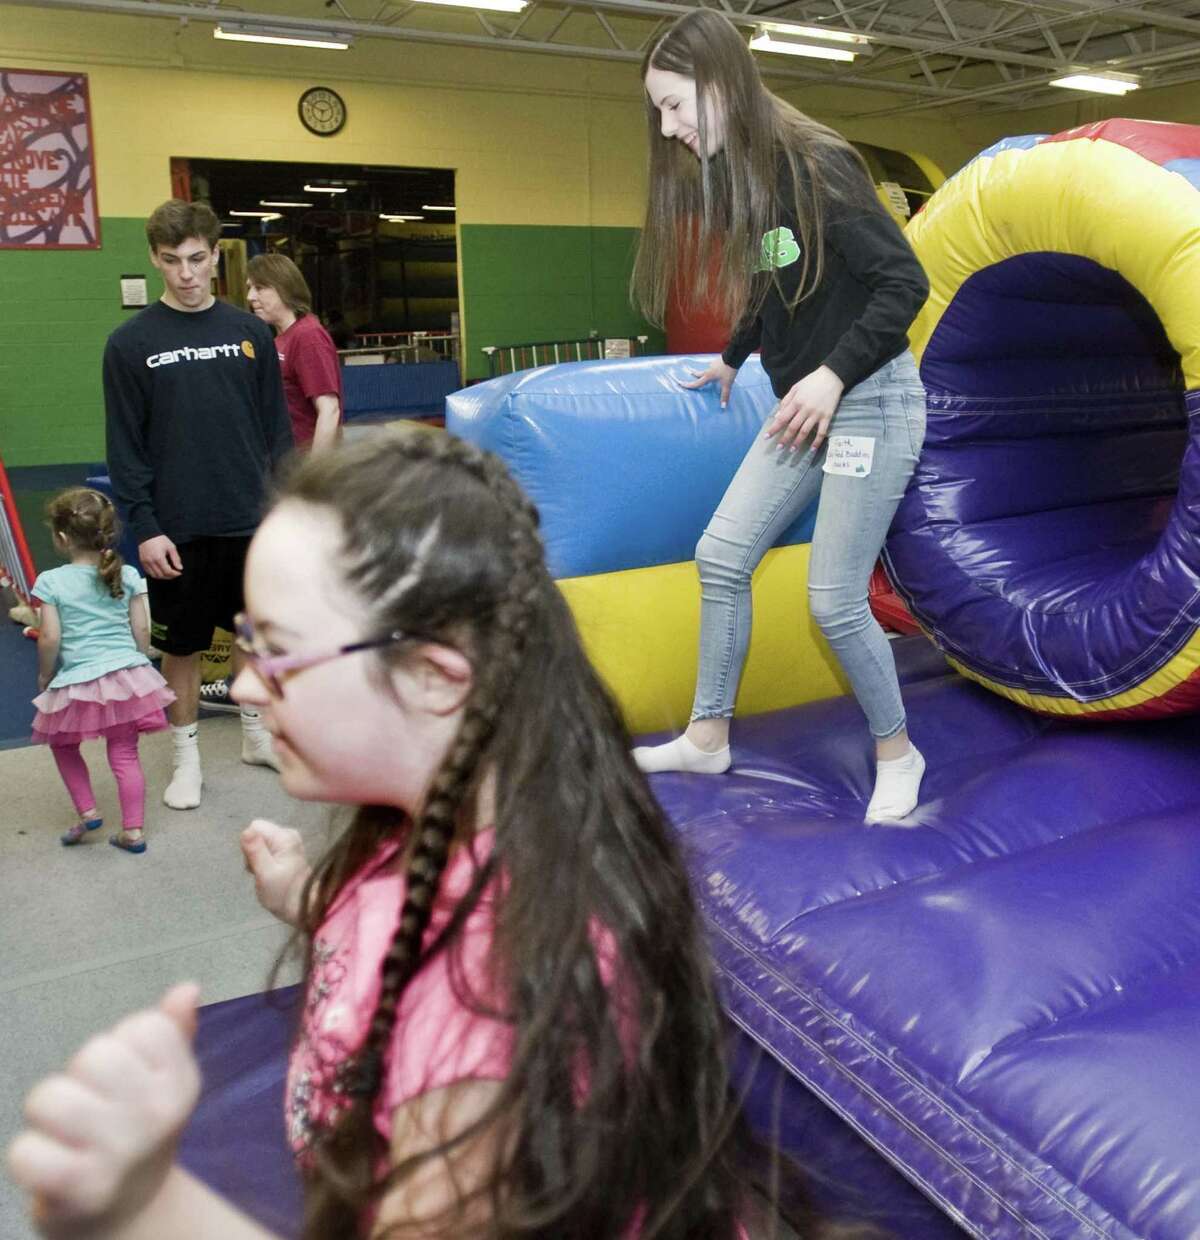 Kally Trudeau, 13 of New Milford, comes out of the Obstacle Course at the Children's Movement Center with New Milford High School sophomore Faith Rosenhagen, right, as part of the high school's Unified Buddies program. Monday, April 3, 2017